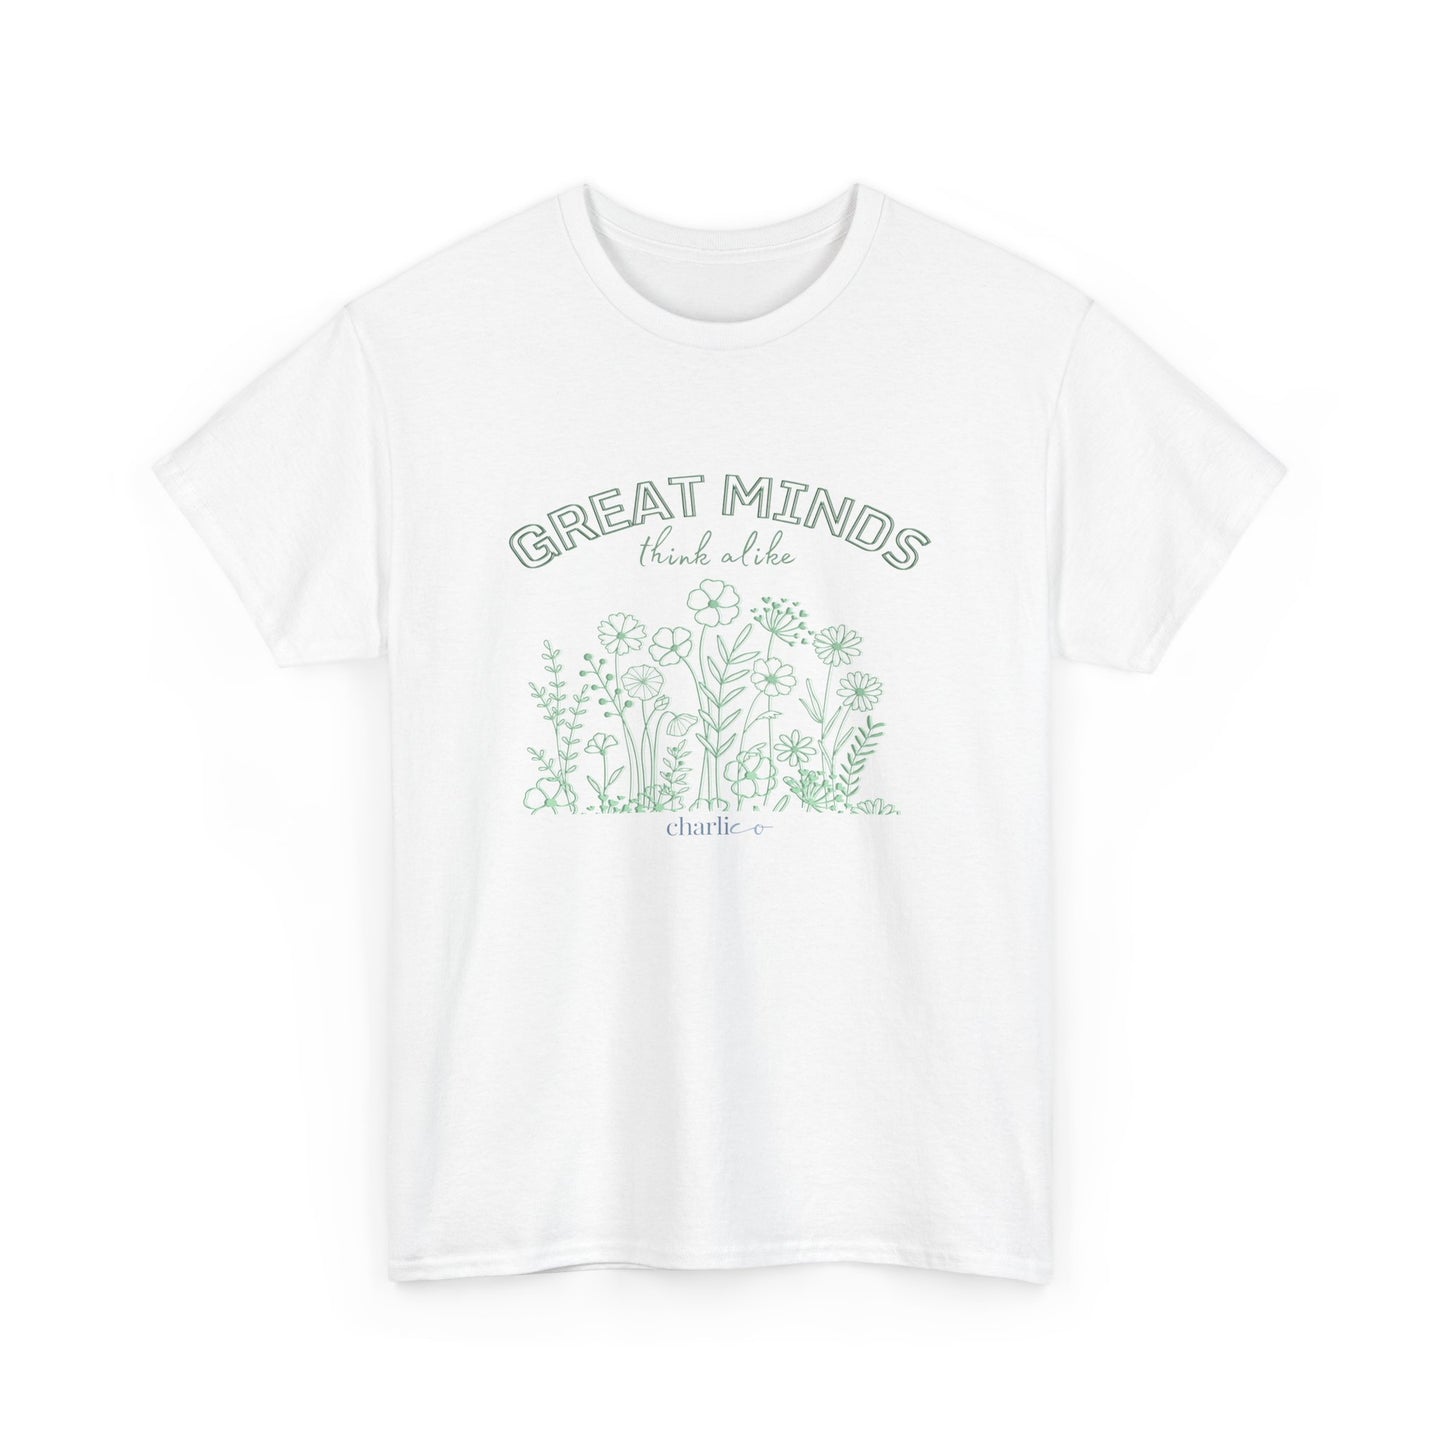 GREAT MINDS Unisex Printed Short-Sleeve T-Shirt for Adults